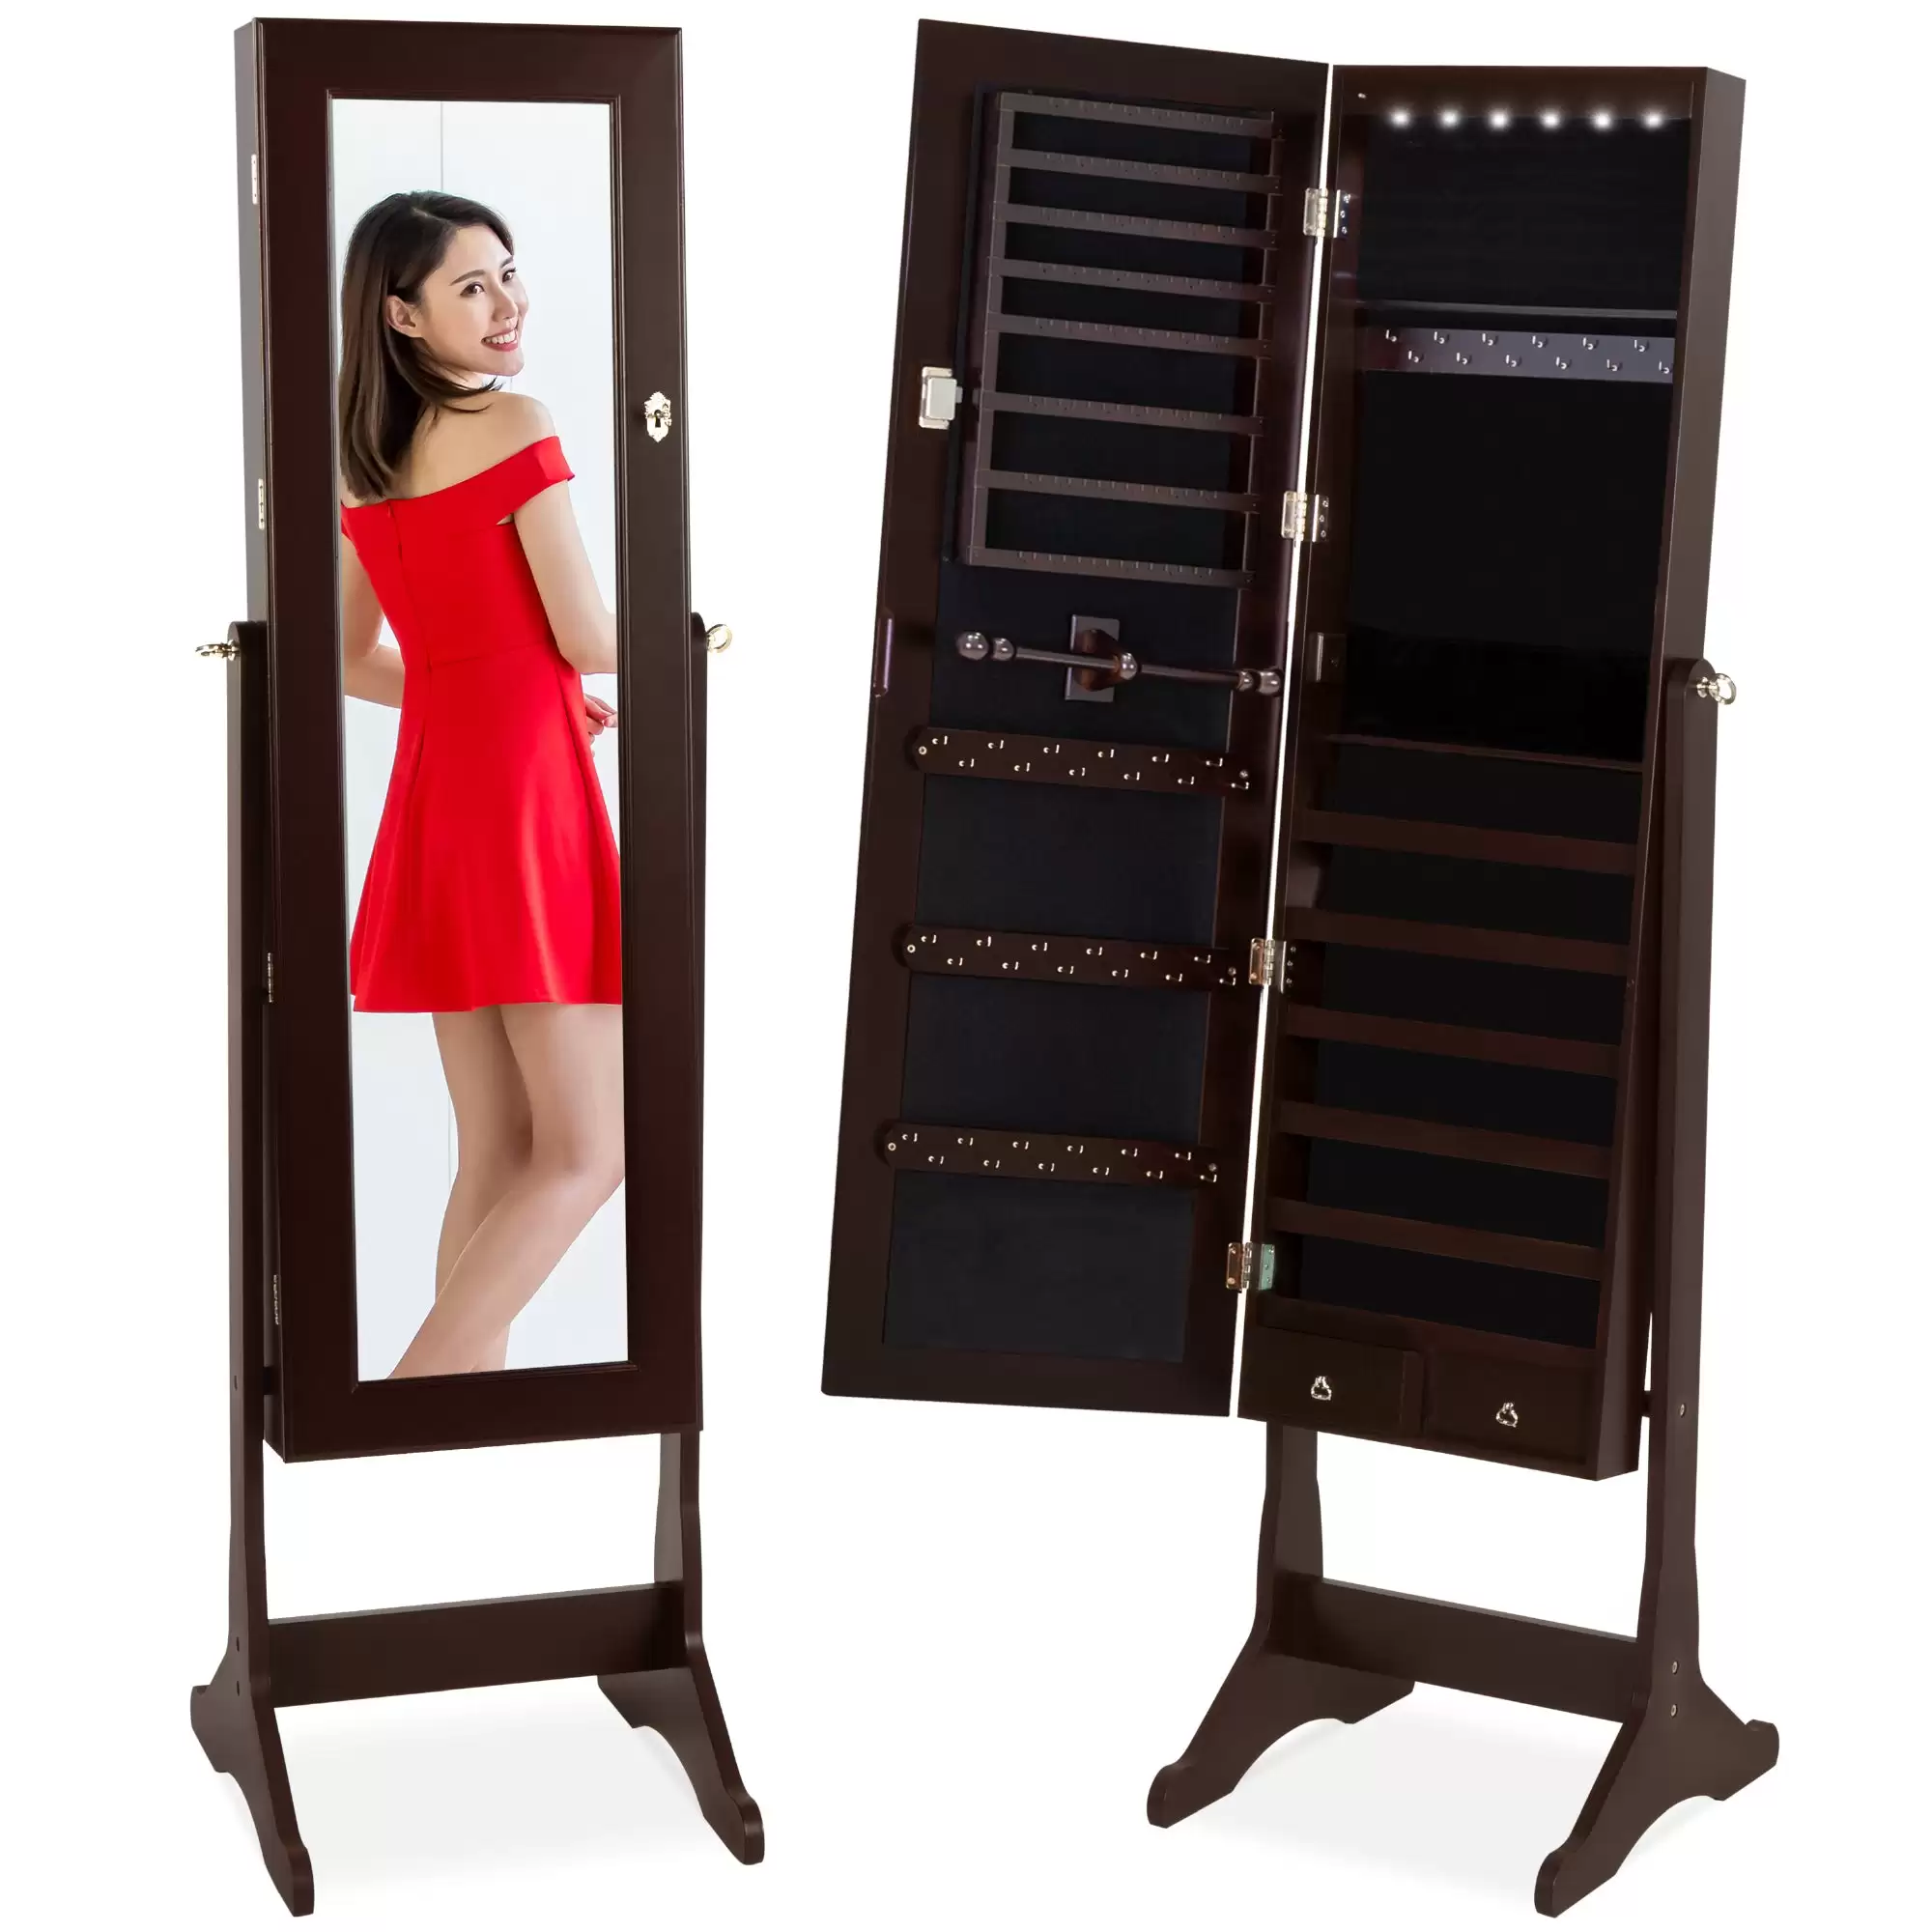 Pay $89.99 6-Tier Standing Jewelry Mirror Armoire W/ Led Lights With This Bestchoiceproducts Discount Voucher